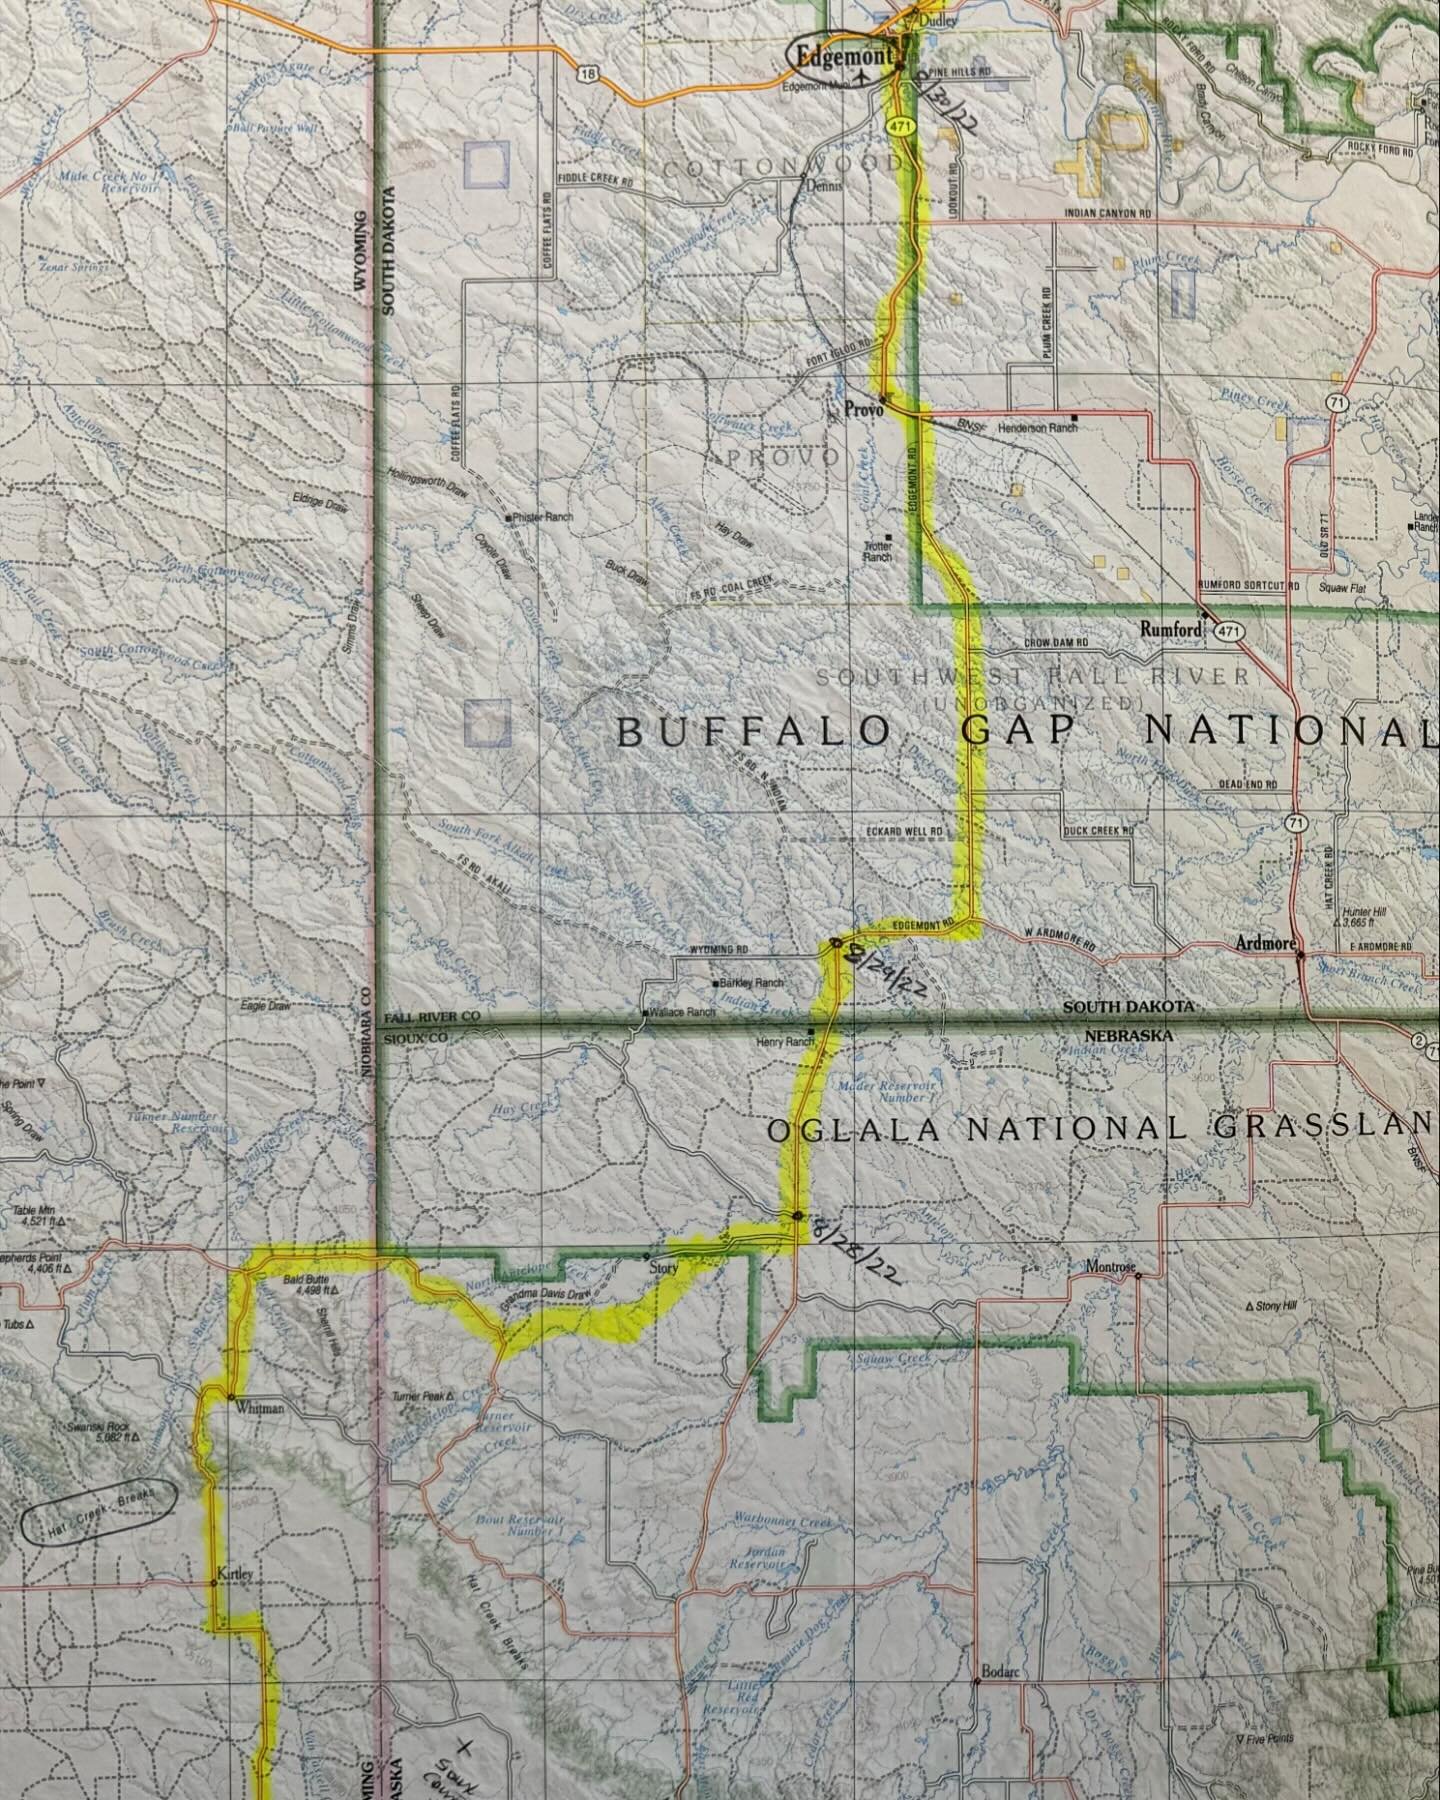 This was our exact walking route from August 27-30, 2022, covering 72 miles across parts of Wyoming, Nebraska, and into Edgemont, South Dakota. In Edgemont, we camped near the railroad tracks. Along this remote segment, we enjoyed 14 Gospel encounter